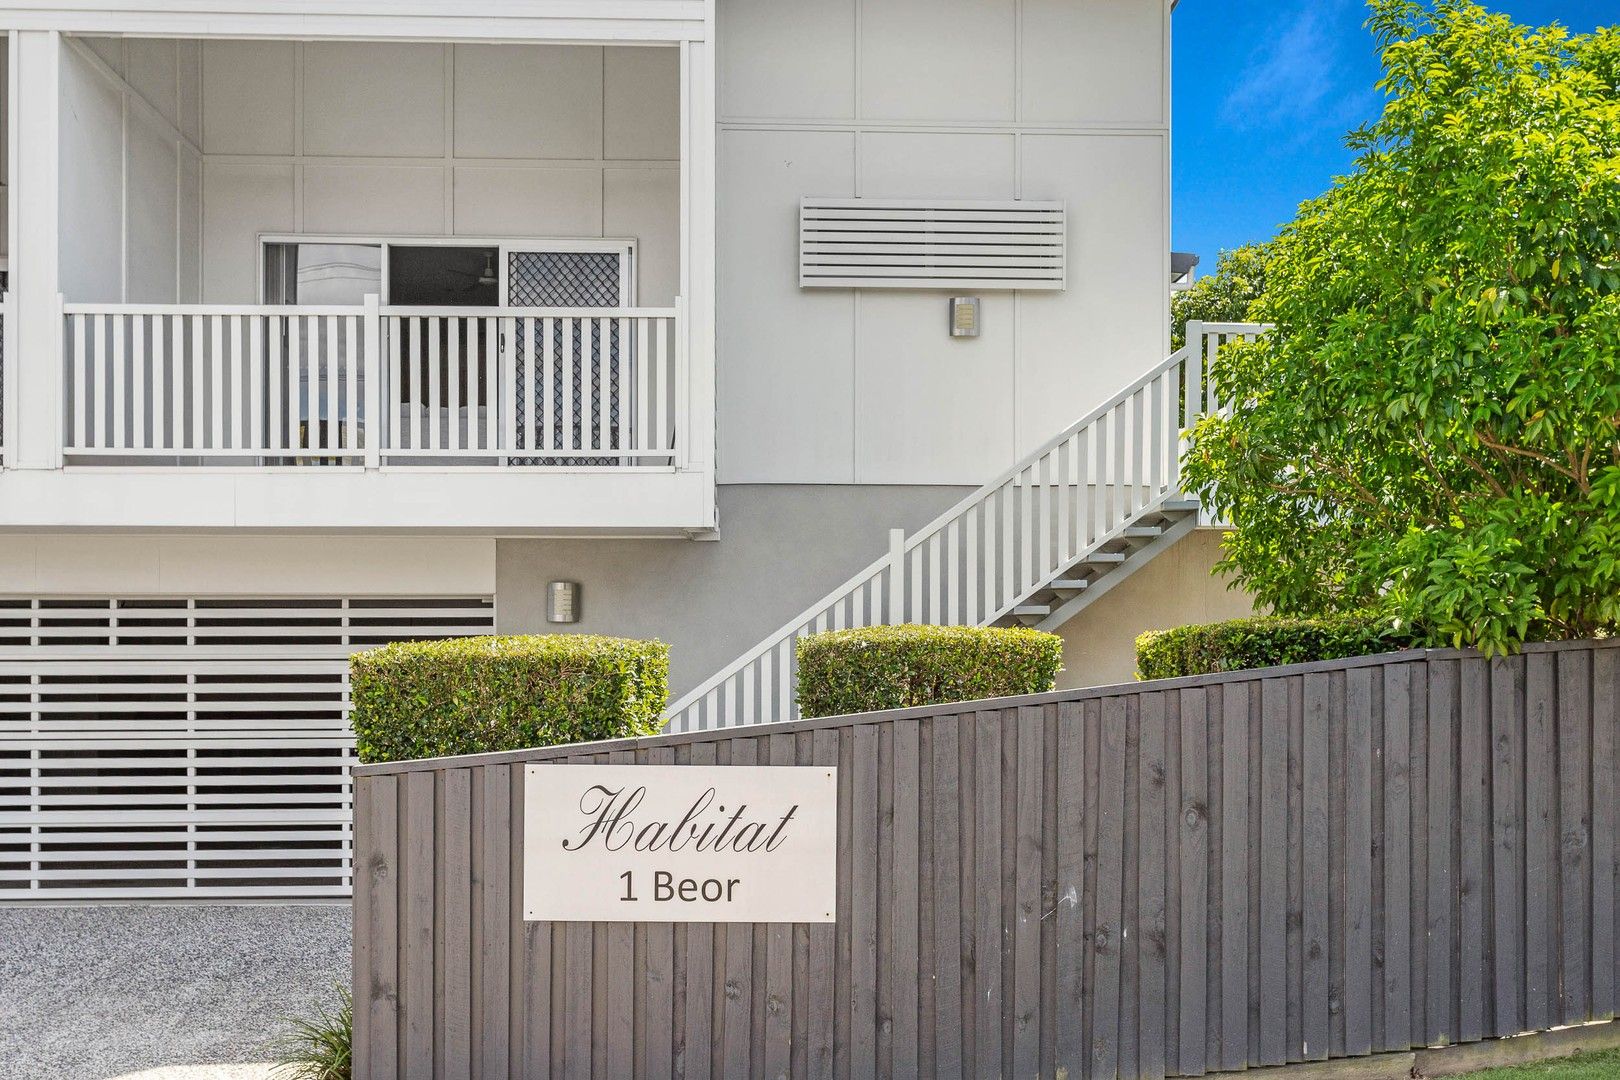 2 bedrooms Apartment / Unit / Flat in 4/1 Beor Street CHERMSIDE QLD, 4032